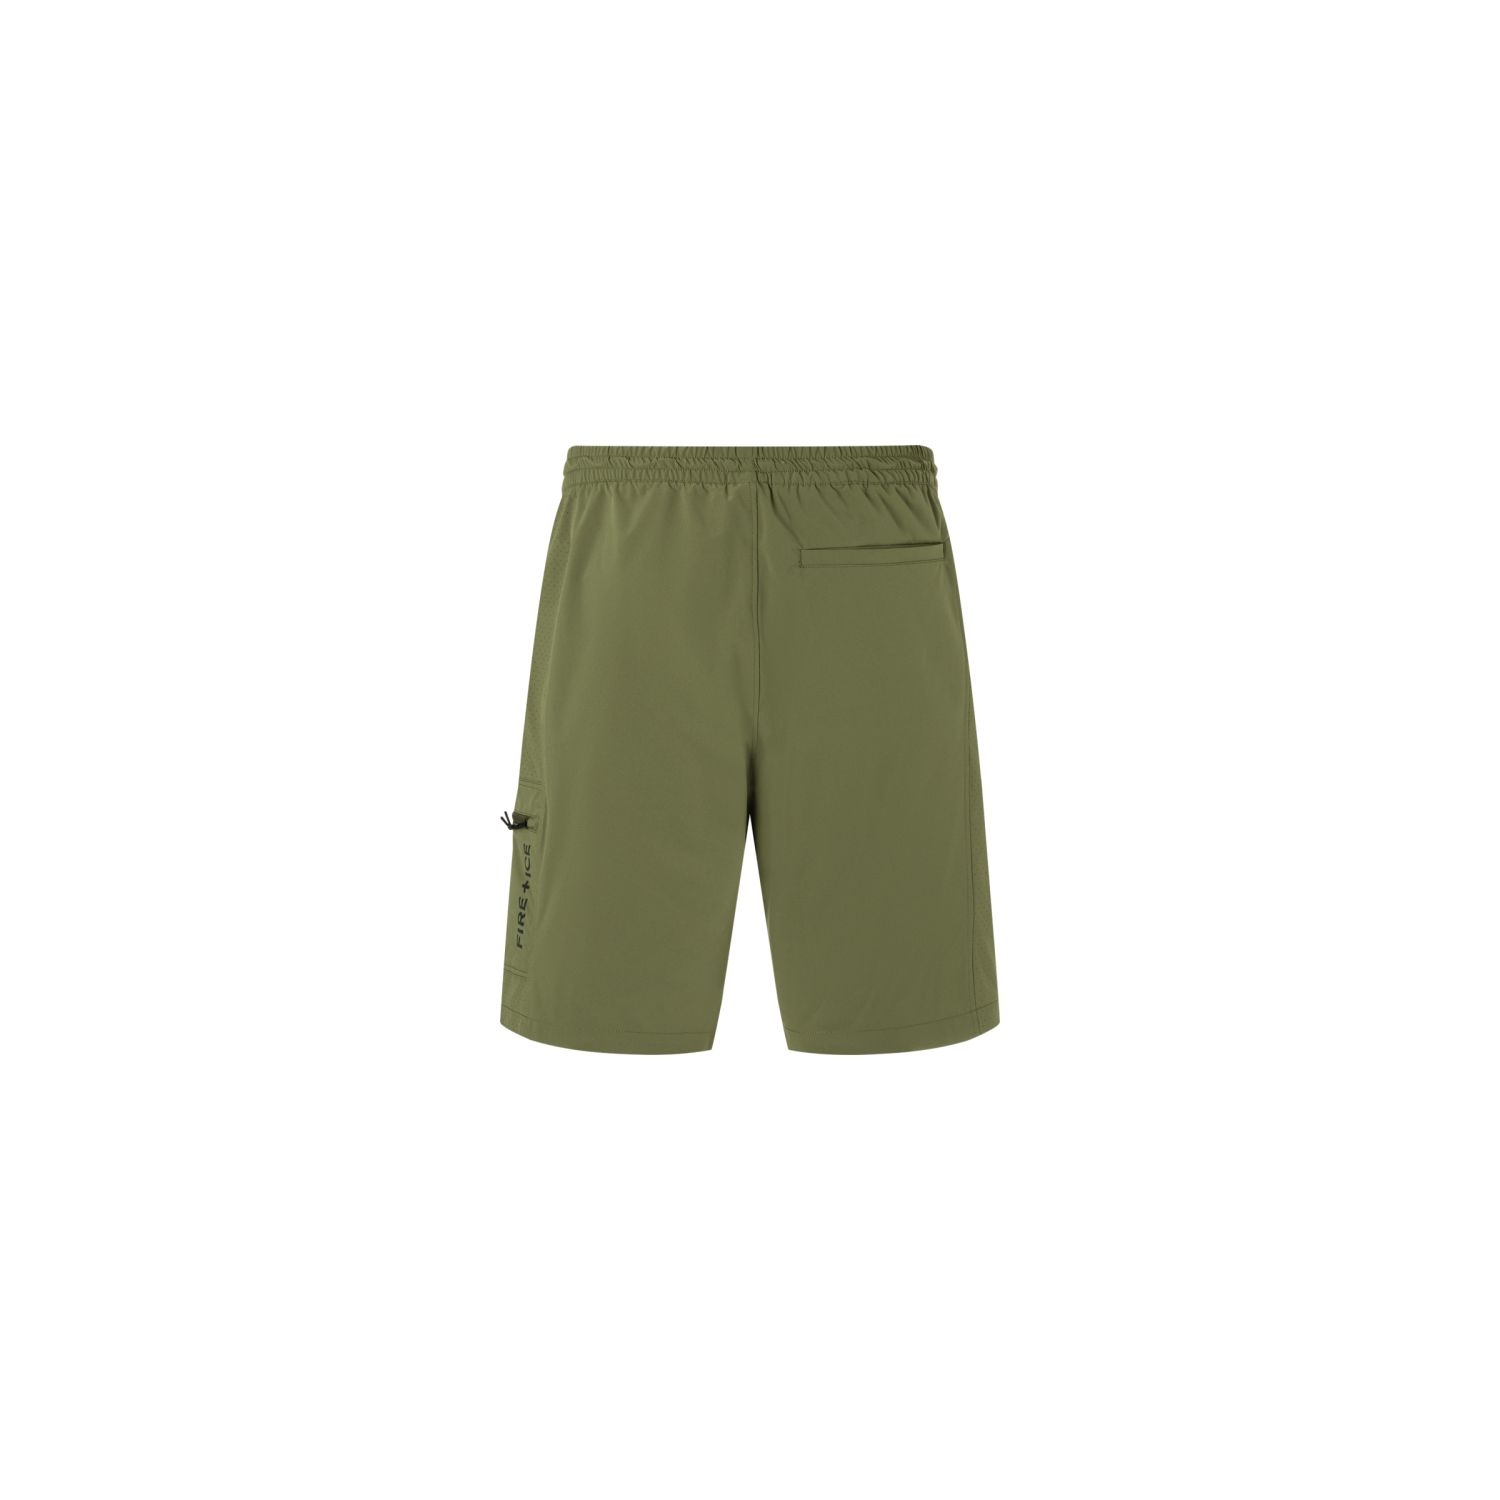 Shorts -  bogner fire and ice PAVEL Functional Shorts